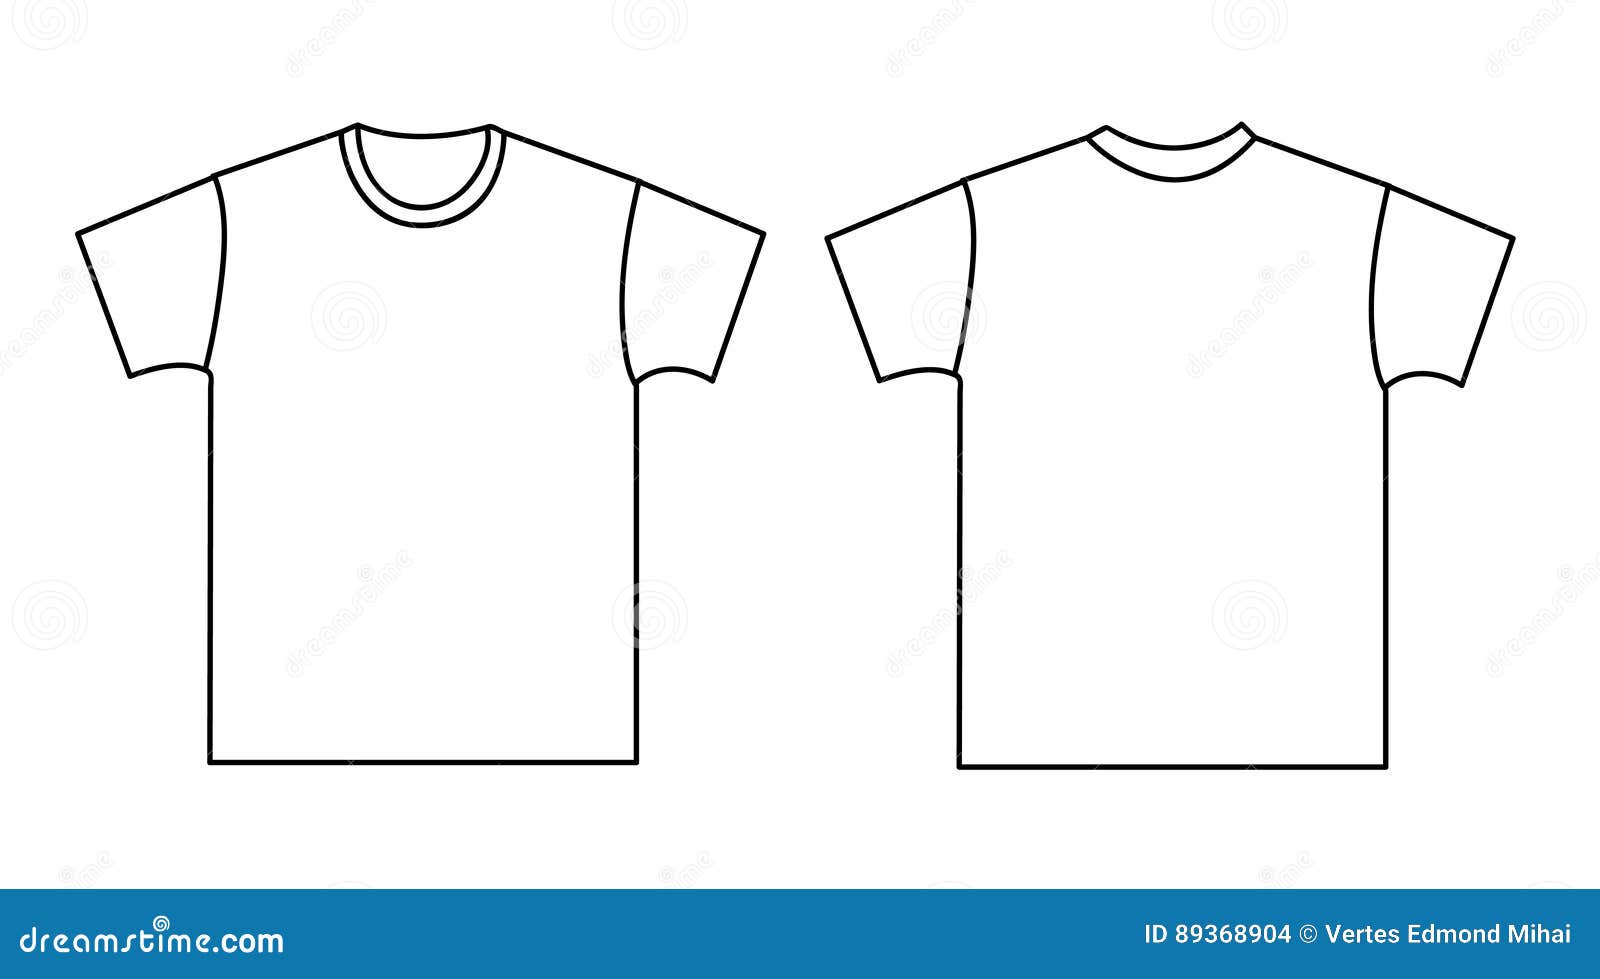 Blank t-shirt template stock vector. Illustration of abstract - 89368904